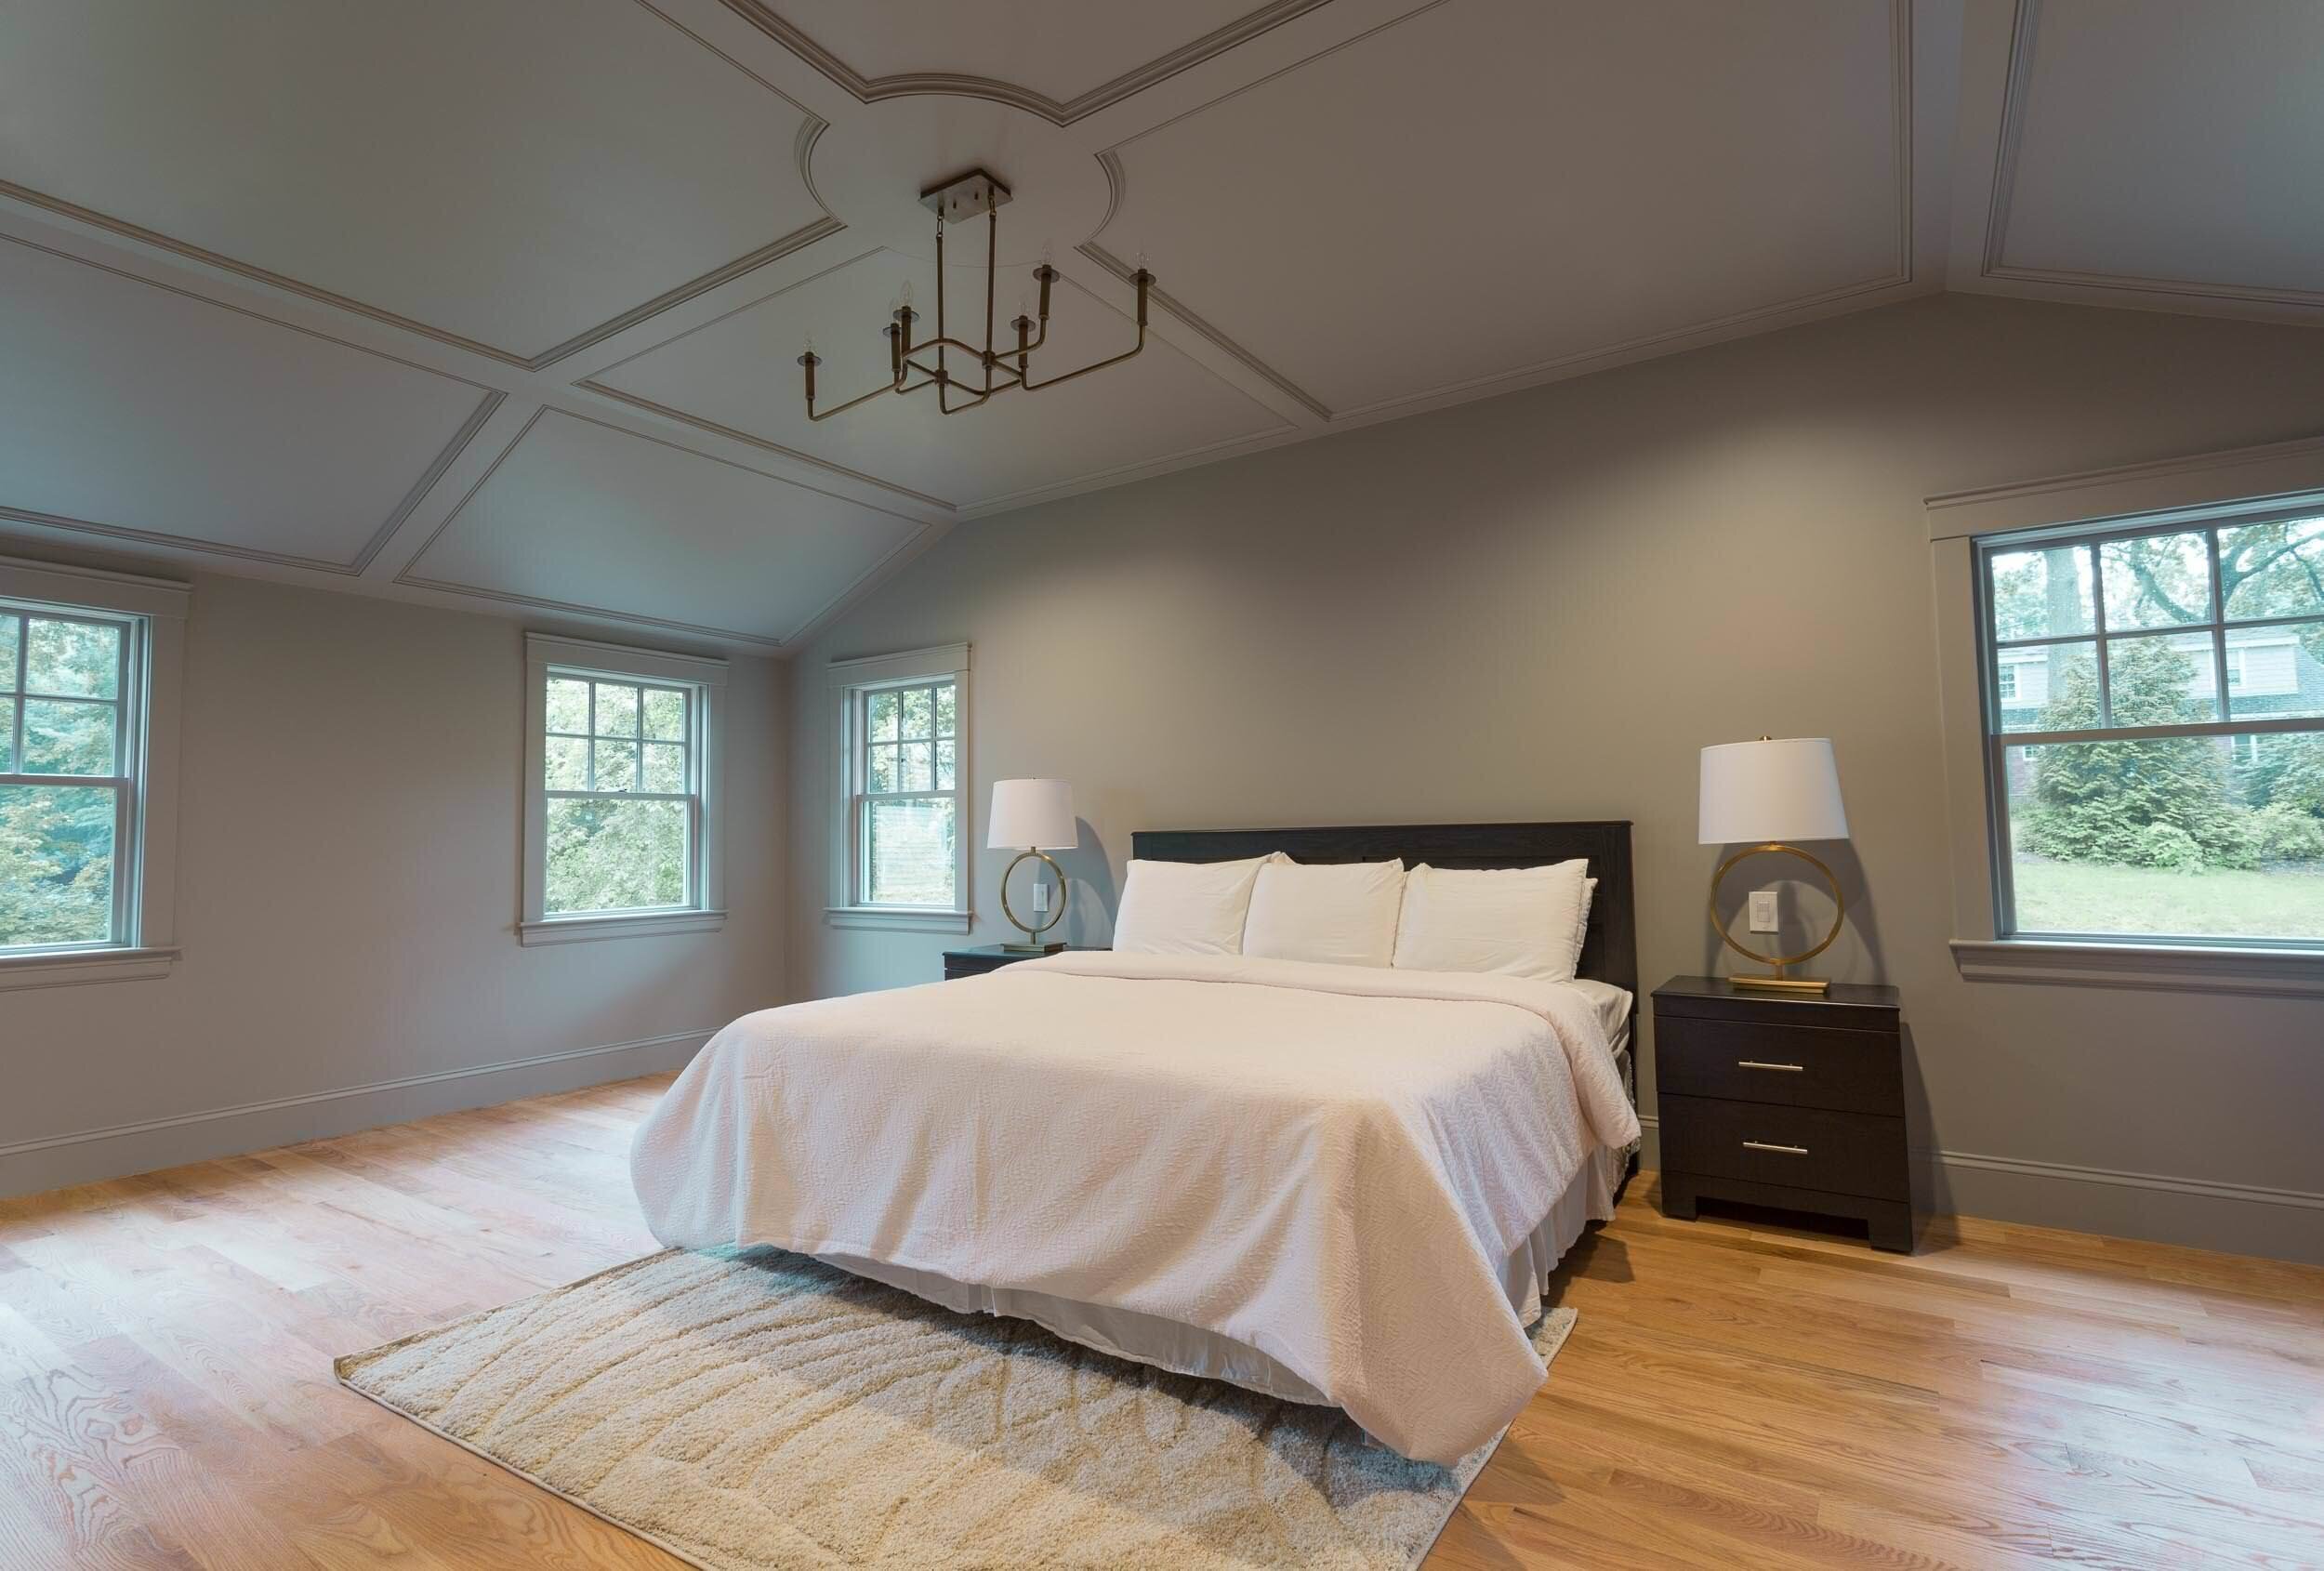 5 Ways To Paint Your Ceiling In 2020, Should Ceilings Be White Or Wall Color